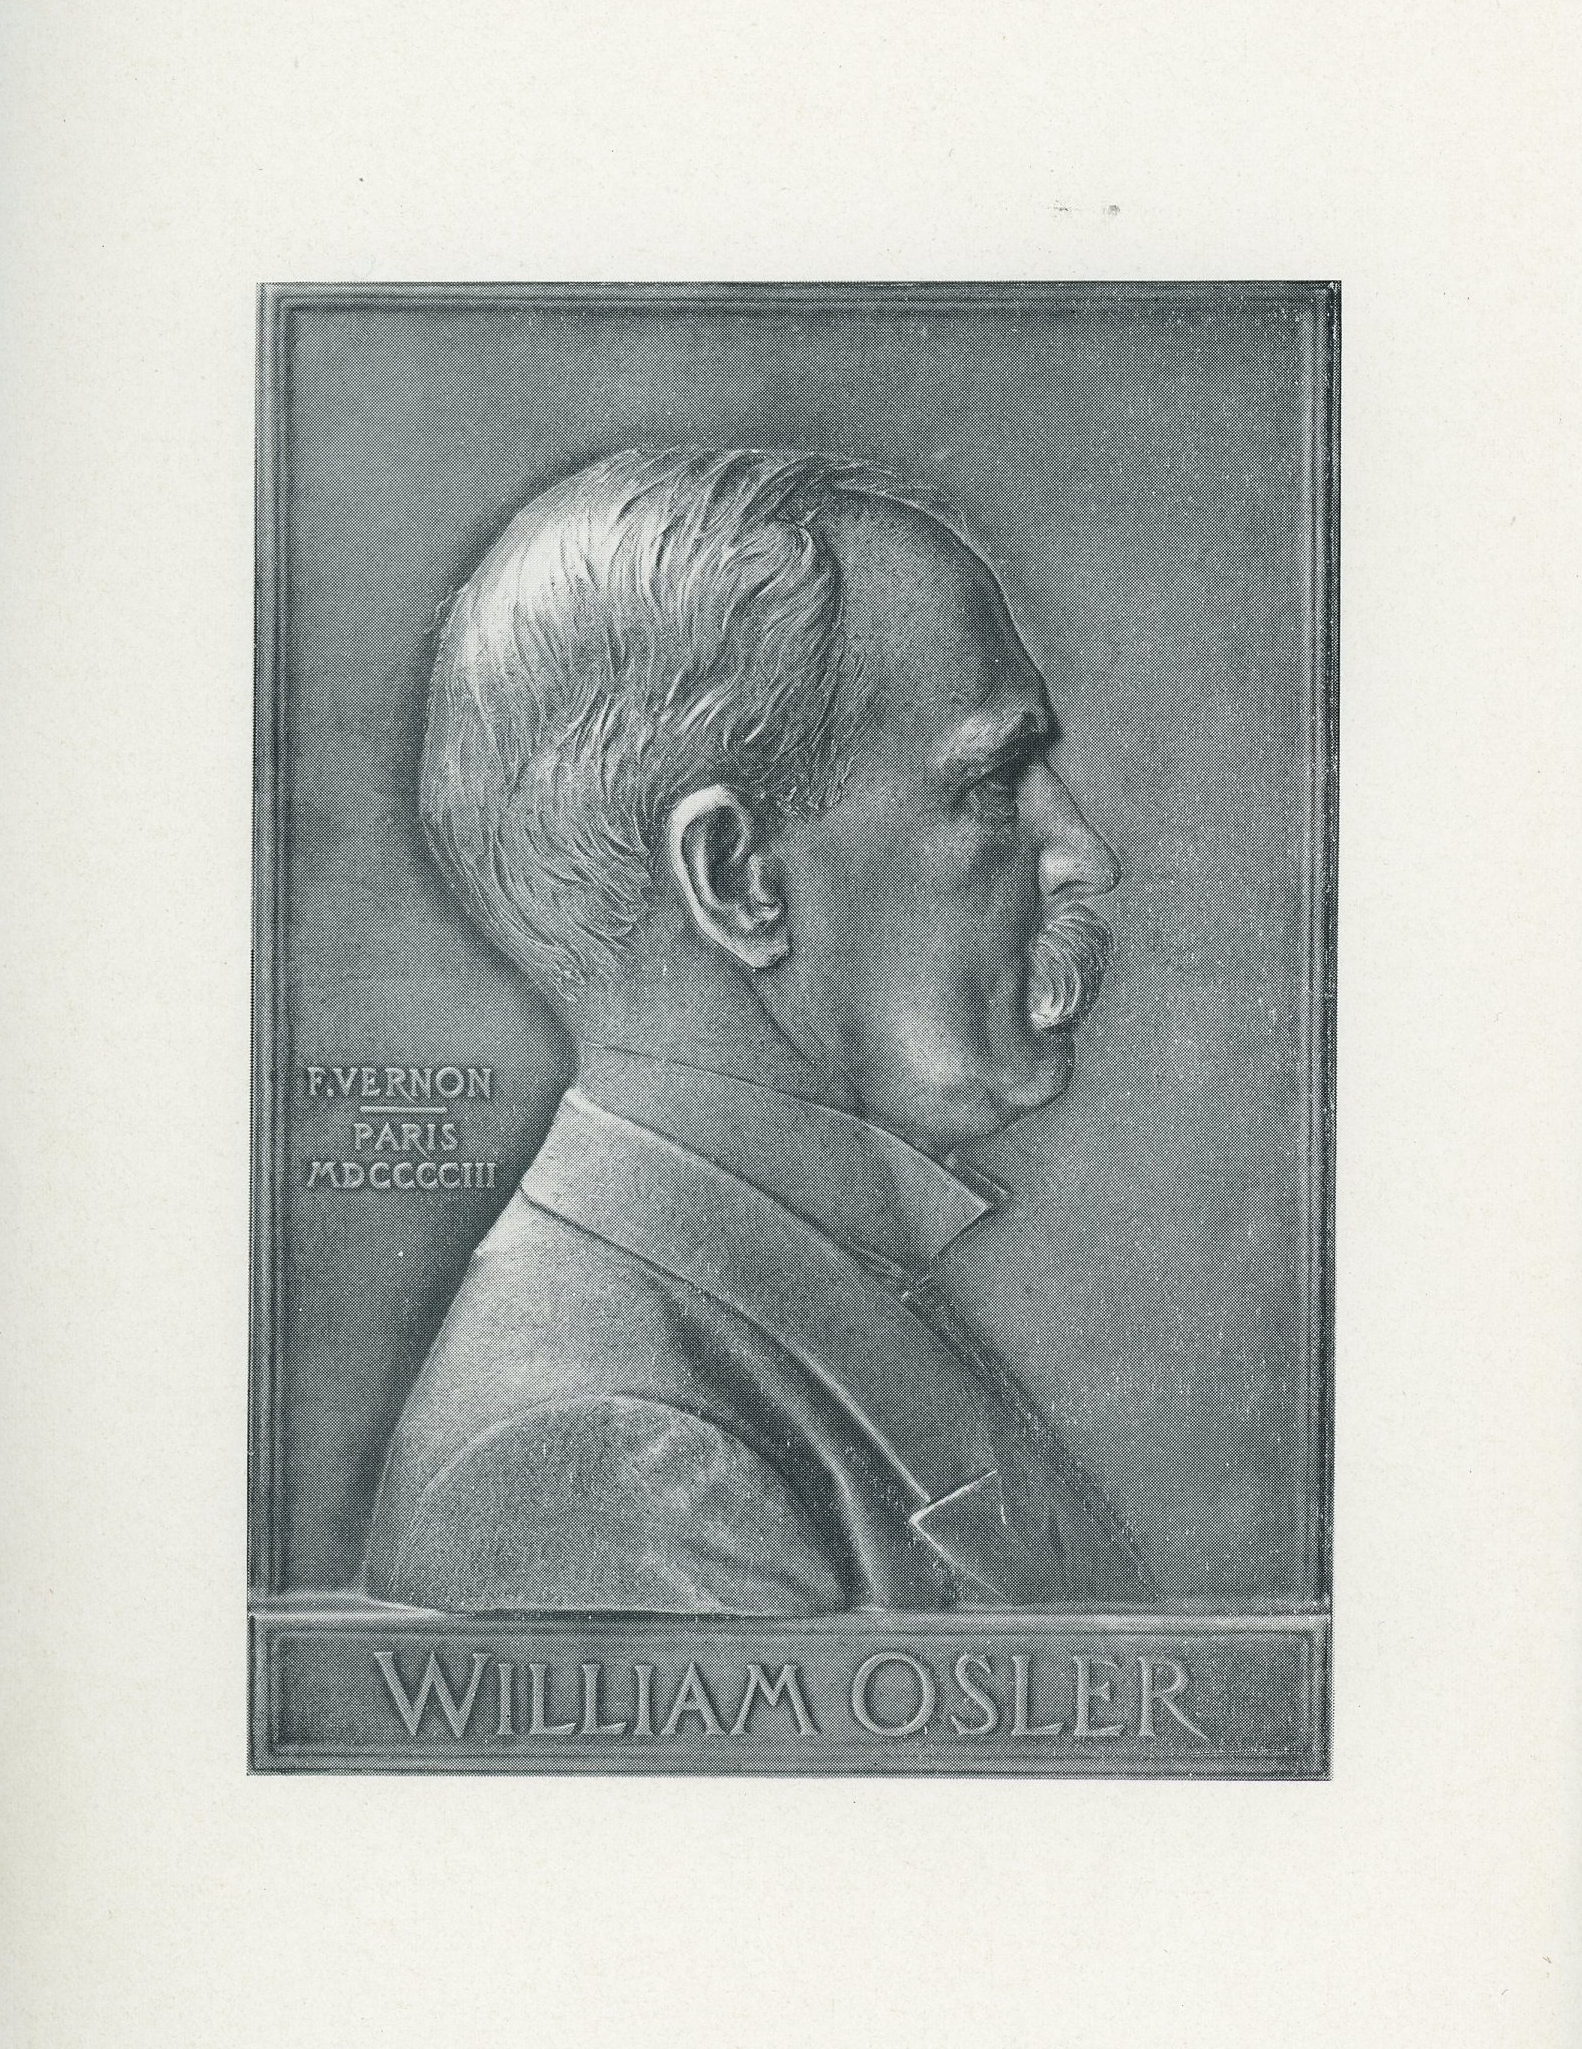 Photograph of a grey engraving of a bust of William Osler, adult, right profile. He is wearing a jacket with a high-collared shirt and tie. He has an imposing moustache and short hair. To his left can be seen the inscription “F. Vernon – Paris MDCCCIII”. The bottom of the engraving reads “William Osler”.